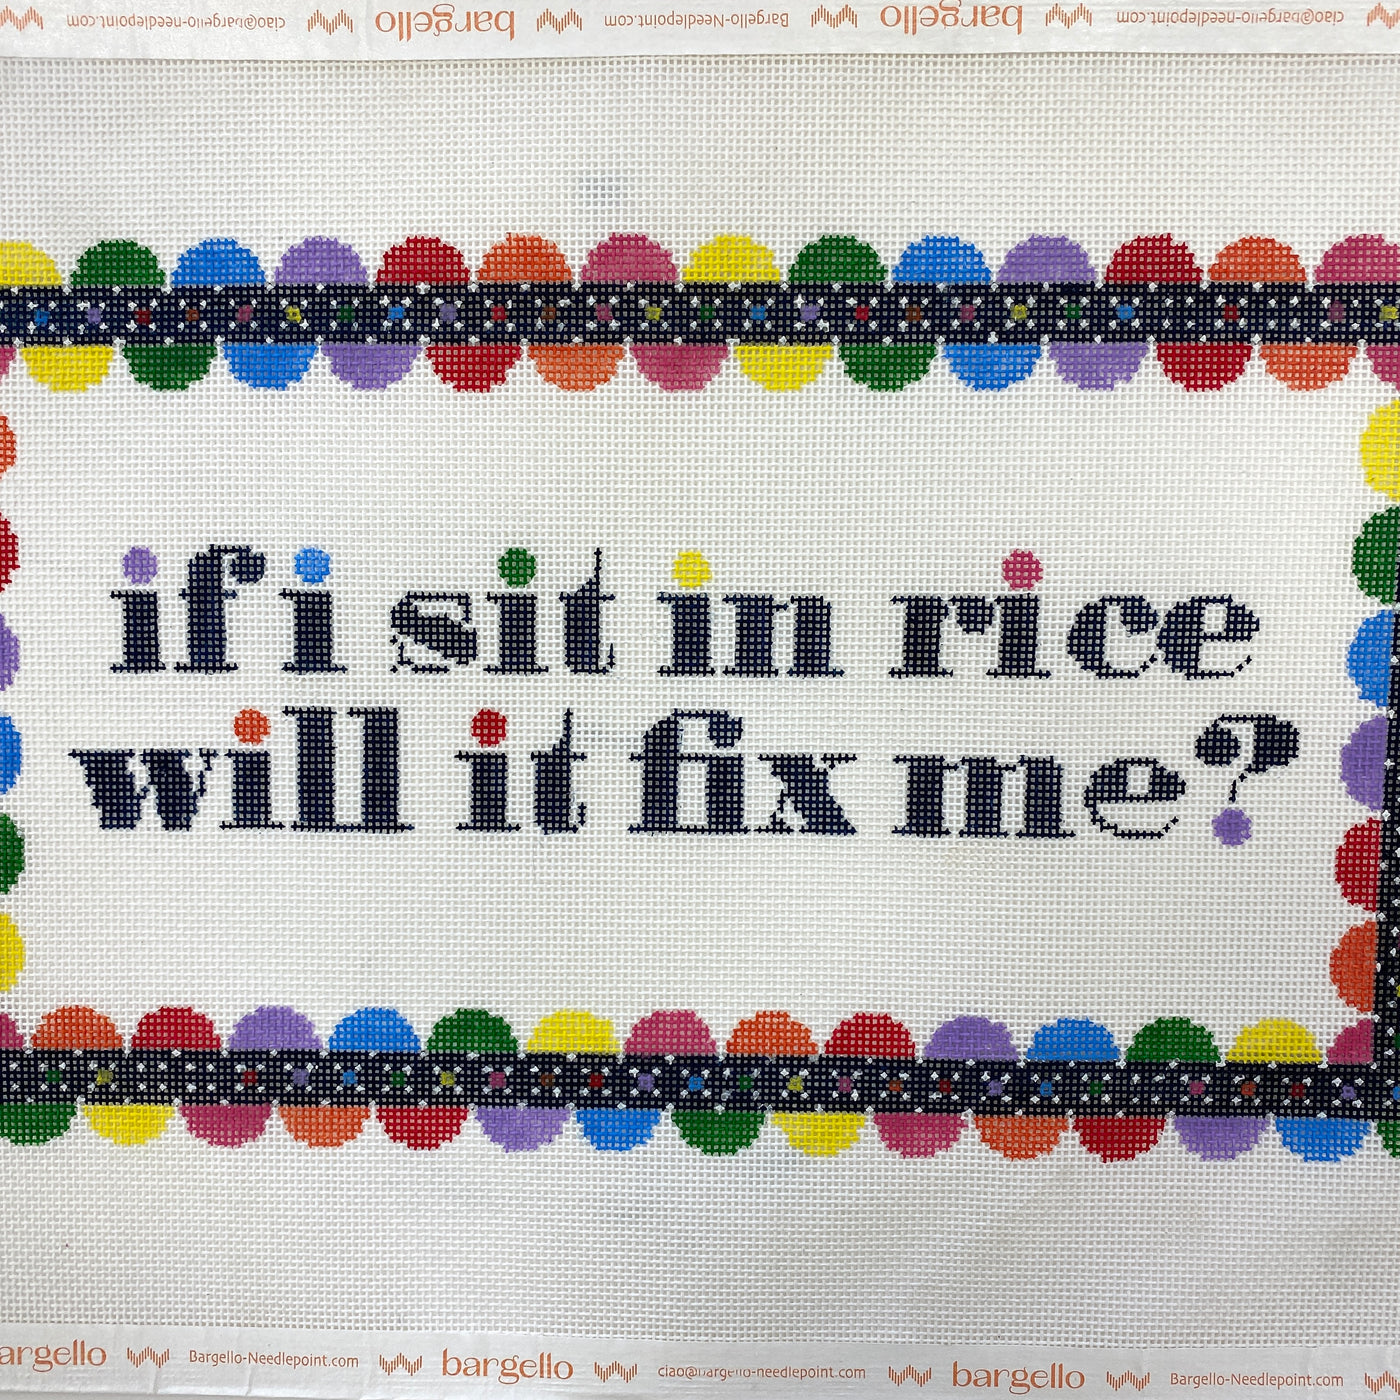 If I Sit in Rice Will it Fix Me? Needlepoint Canvas